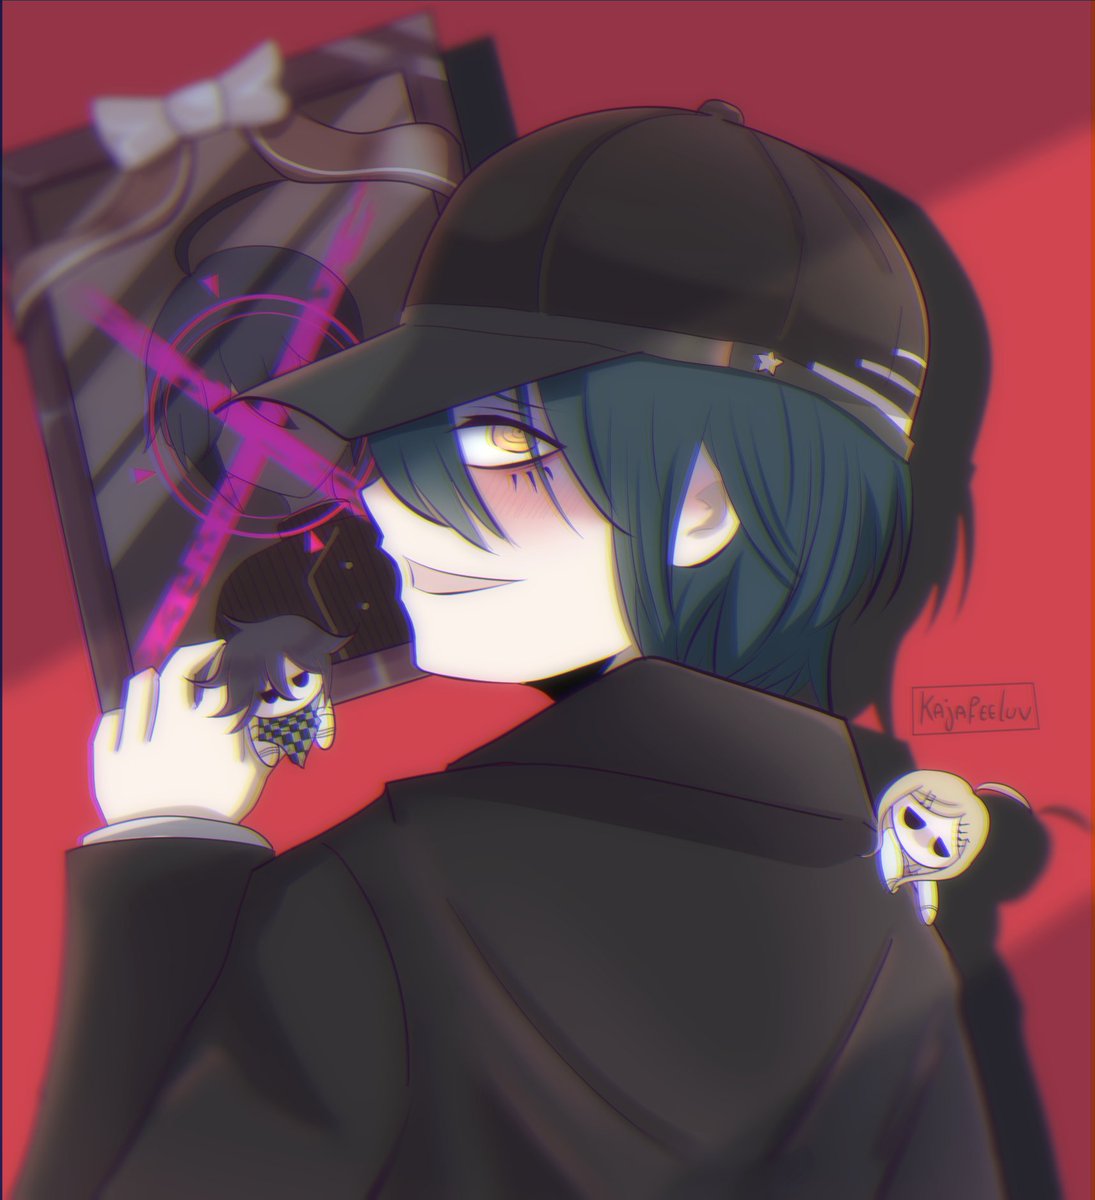 Shuichi Saihara Fanart Pregame Mastermind Shuichi Danganronpa Danganronpa Characters Danganronpa V3 The Following Set Are Unofficial Half Body Sprites Cropped From Shuichi S Full Body Sprites In Order To Give Him